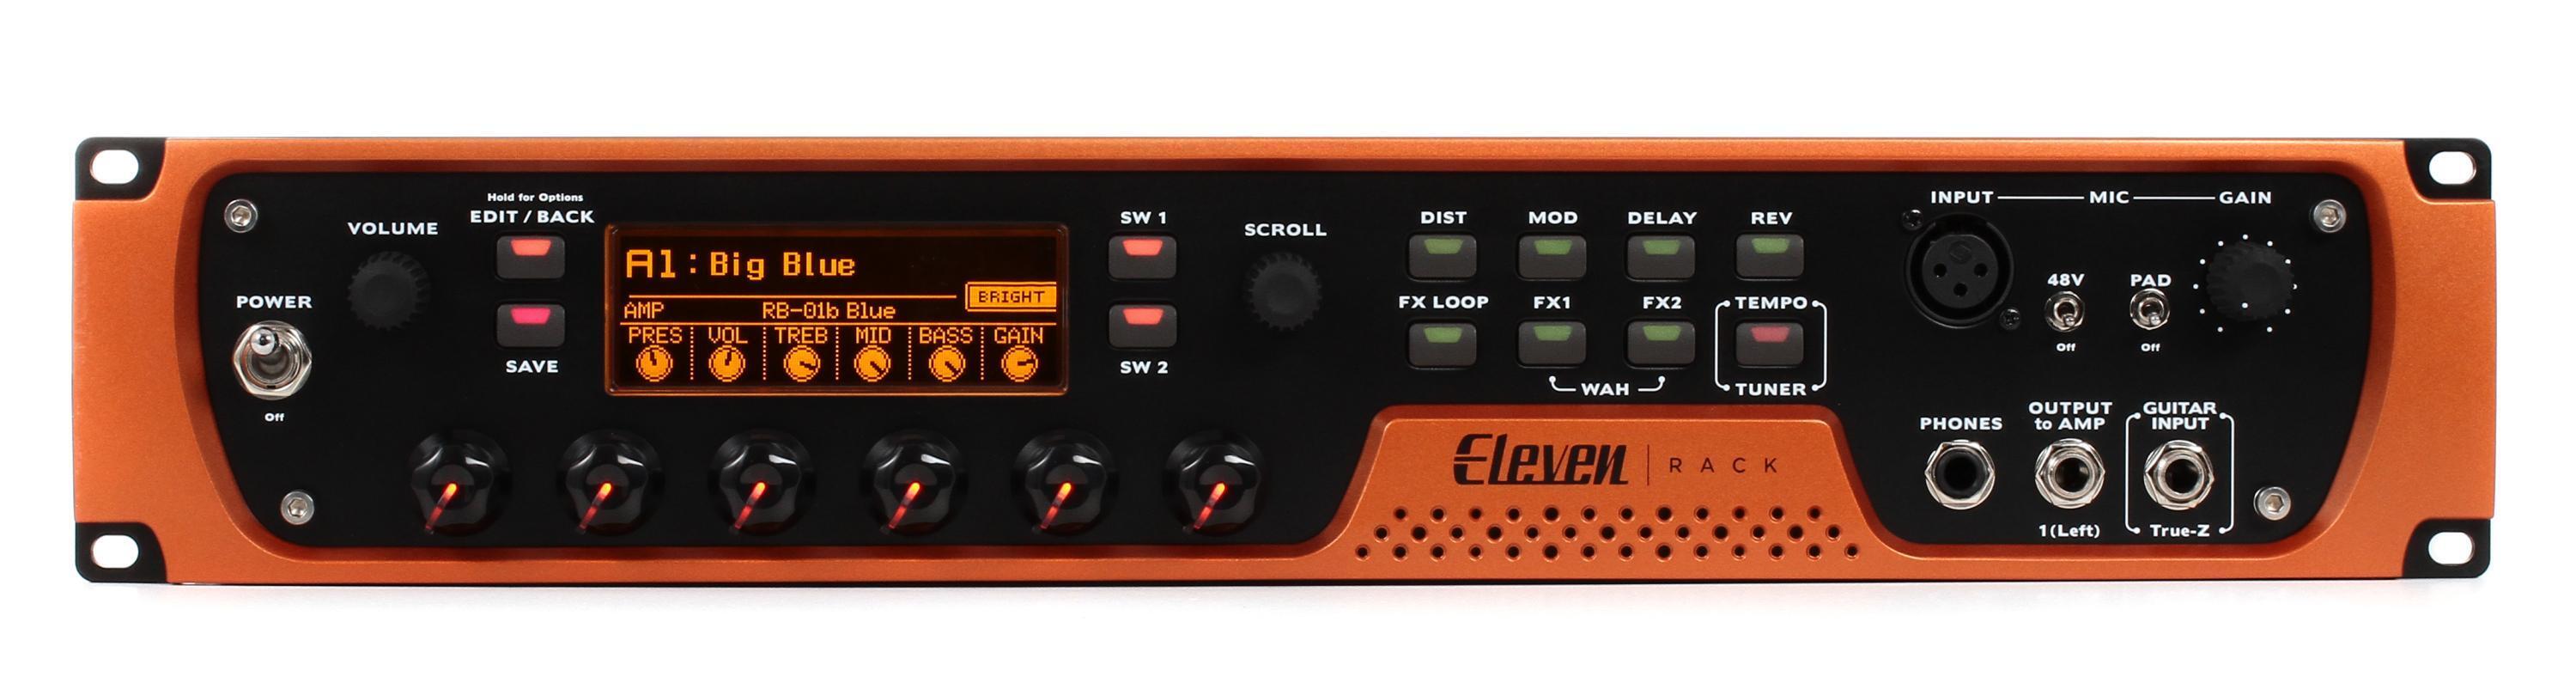 Avid Eleven Rack Special Edition - Includes Pro Tools First